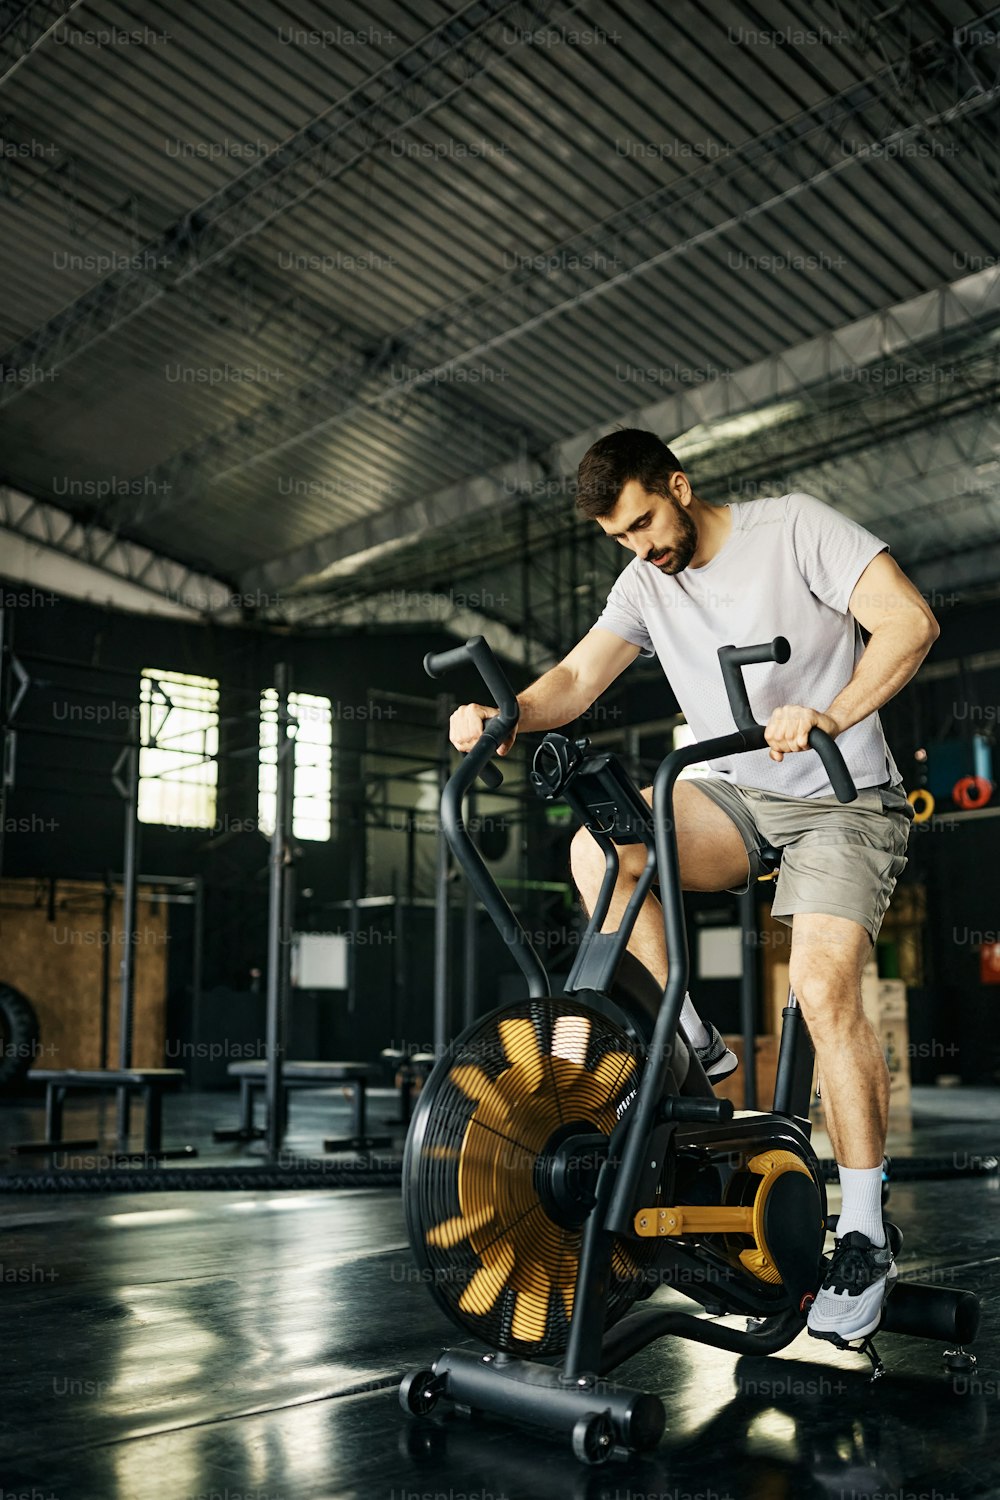 Male athlete exercising on exercise bike during cross training in a gym.